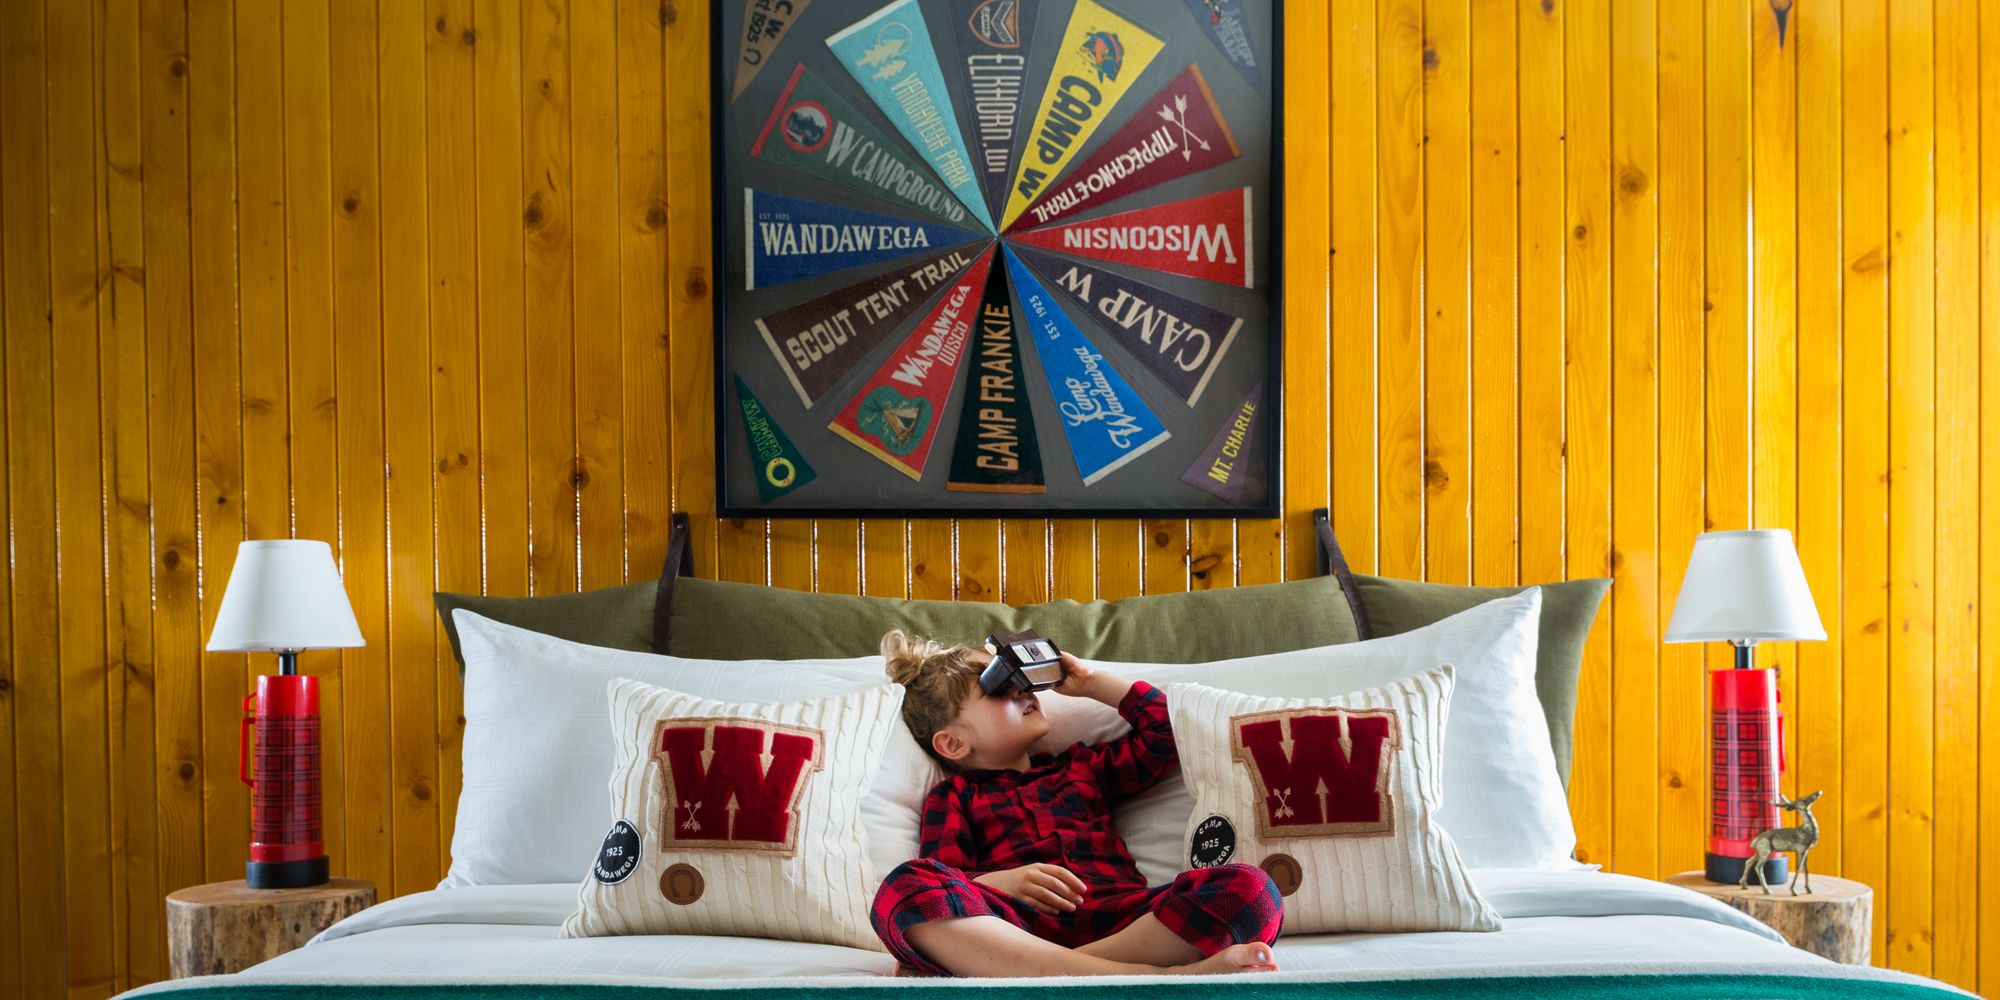 19 Design Takeaways From Small College Town Hotels - Graduate Hotels  Vintage Design Inspiration